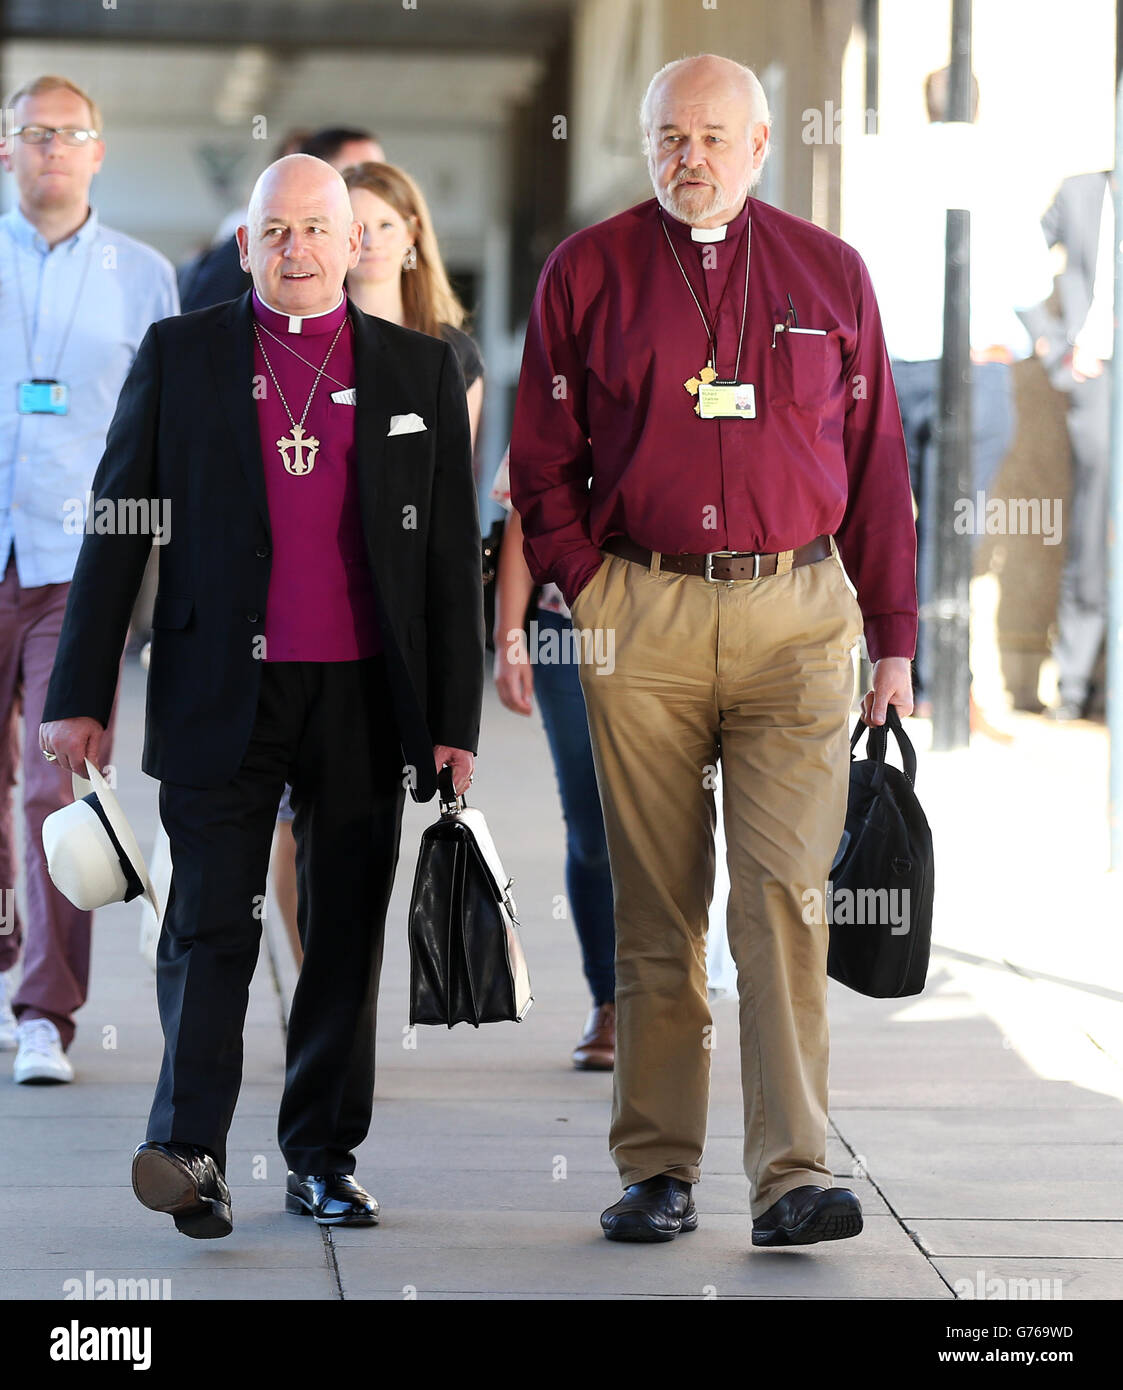 The Bishop of London Richard Chartres (right) arrives for the General Synod of Church of England meeting at The University of York. Stock Photo